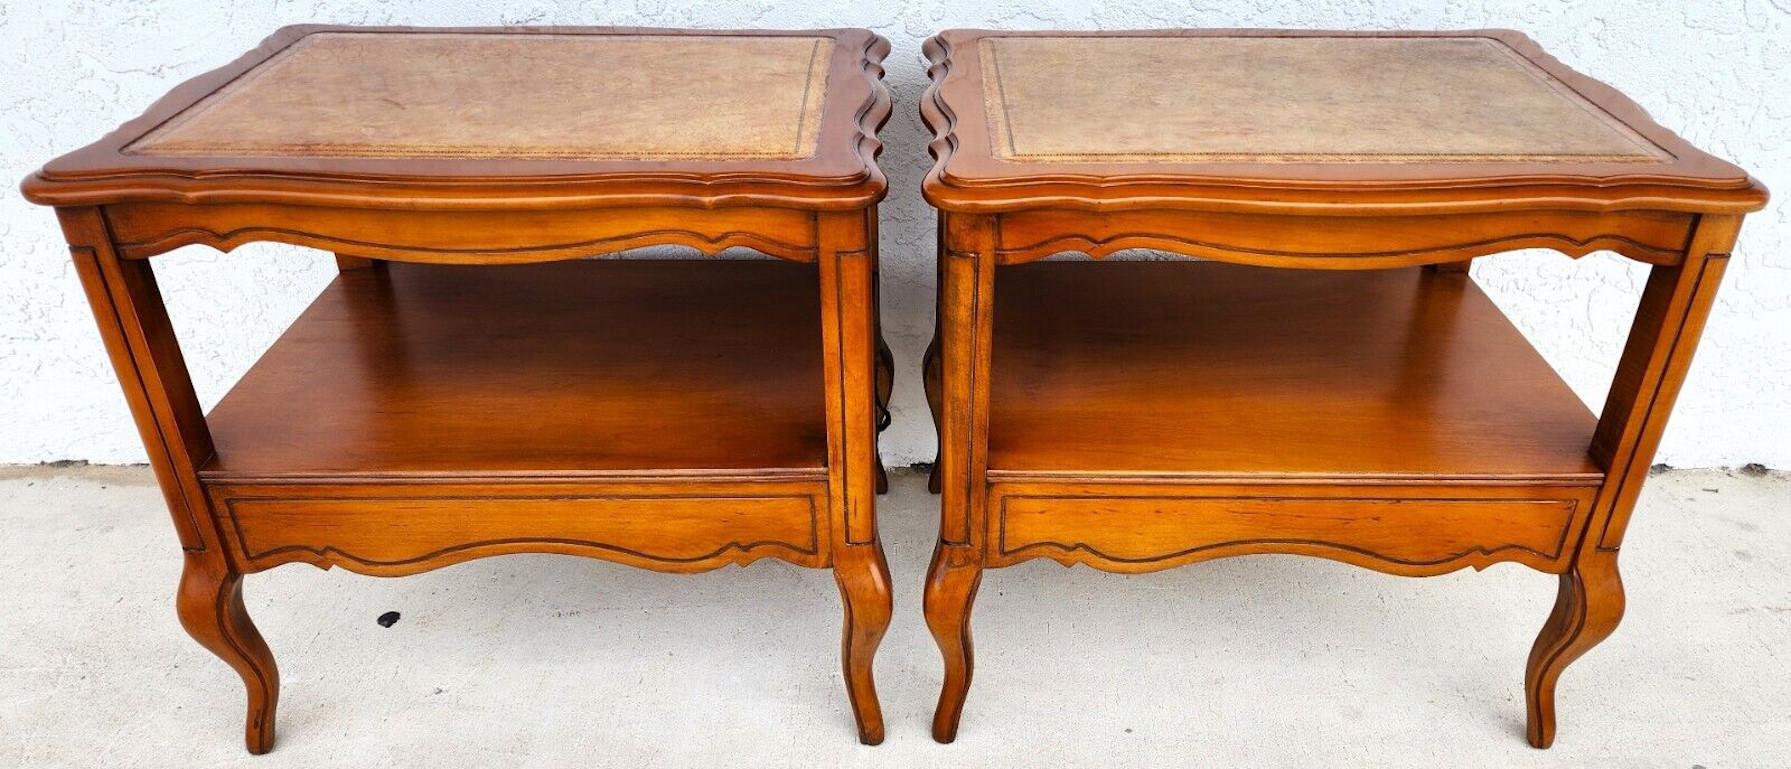 Vintage French Side Tables Walnut Leather Top by HAMMARY In Good Condition For Sale In Lake Worth, FL